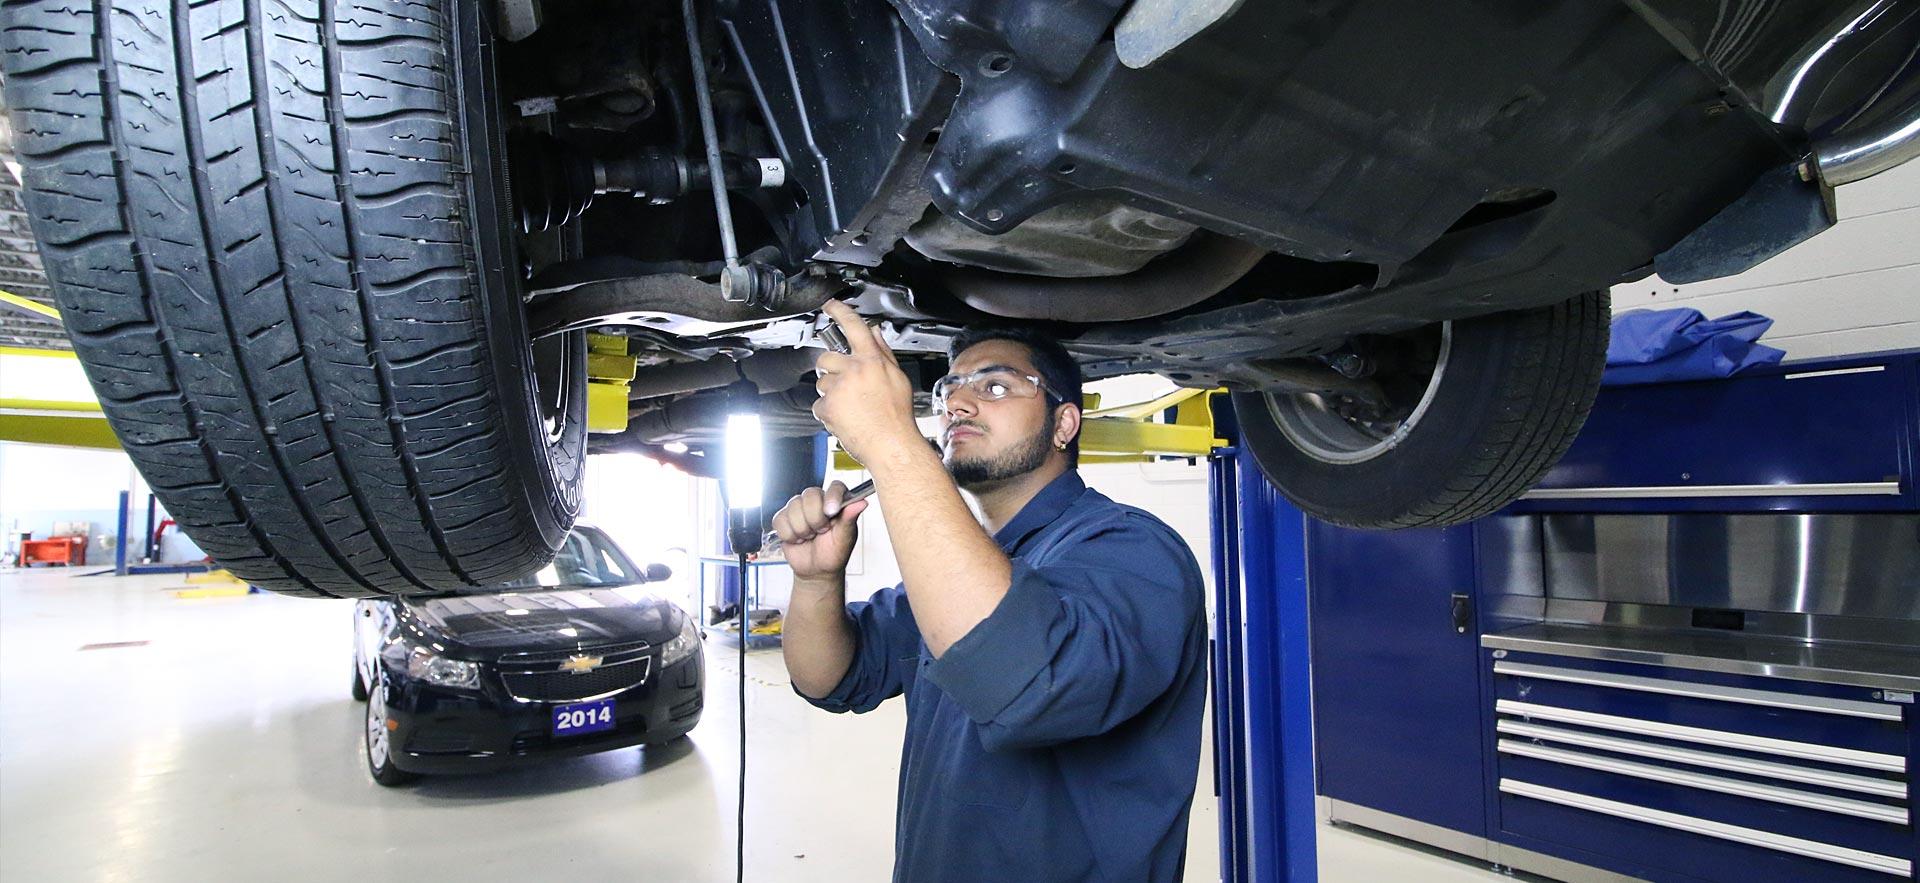 One male Motive Power Fundamentals - Automotive Repair student works a car thats on a lift. 